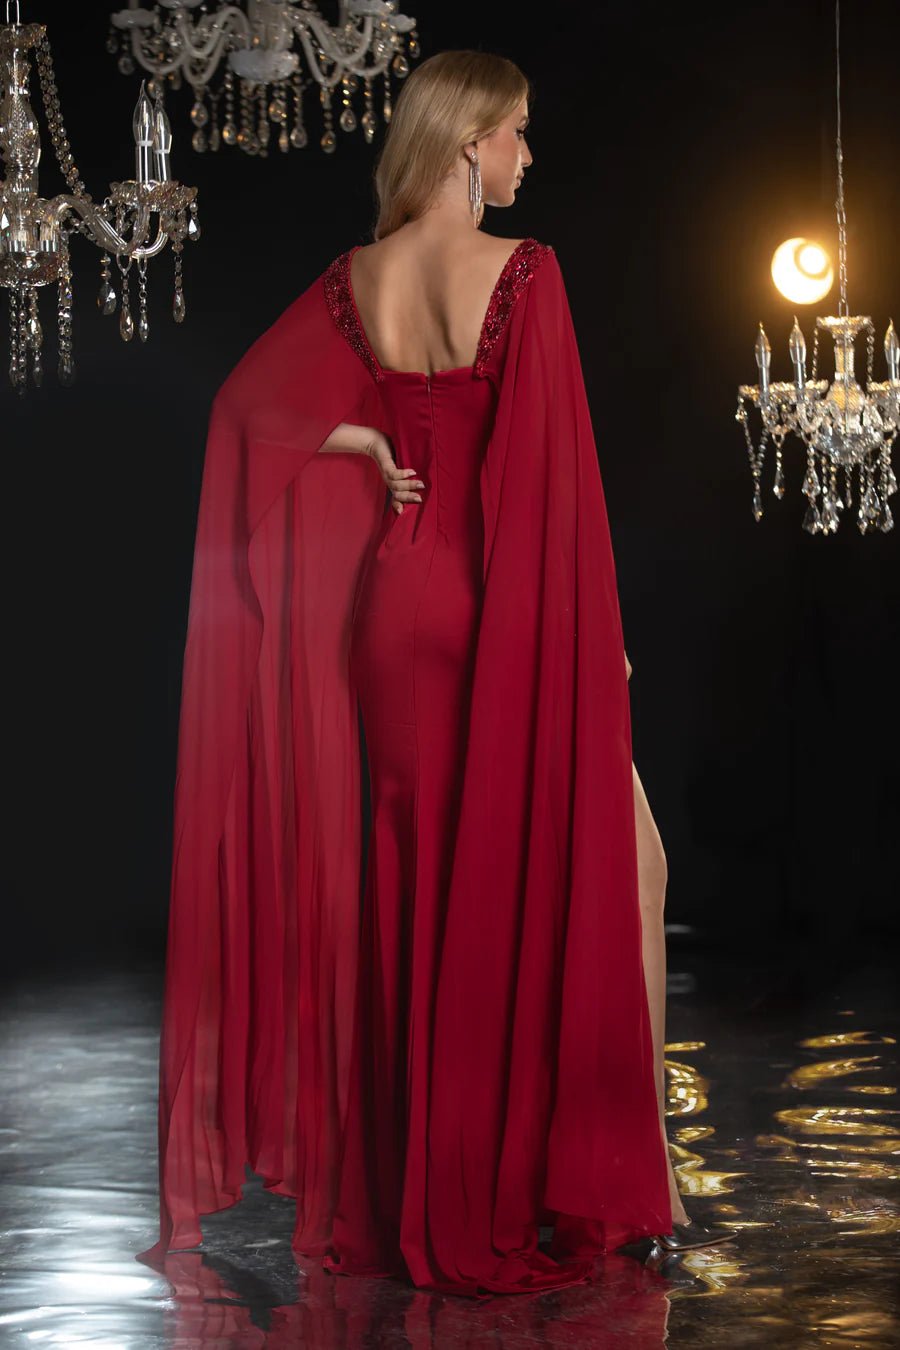 Gothic Red Sequin Evening Gown with Cape Sleeves and High Slit - Designer Sequin Dress and Pretty Sequin Dress Plus Size - WonderlandByLilian